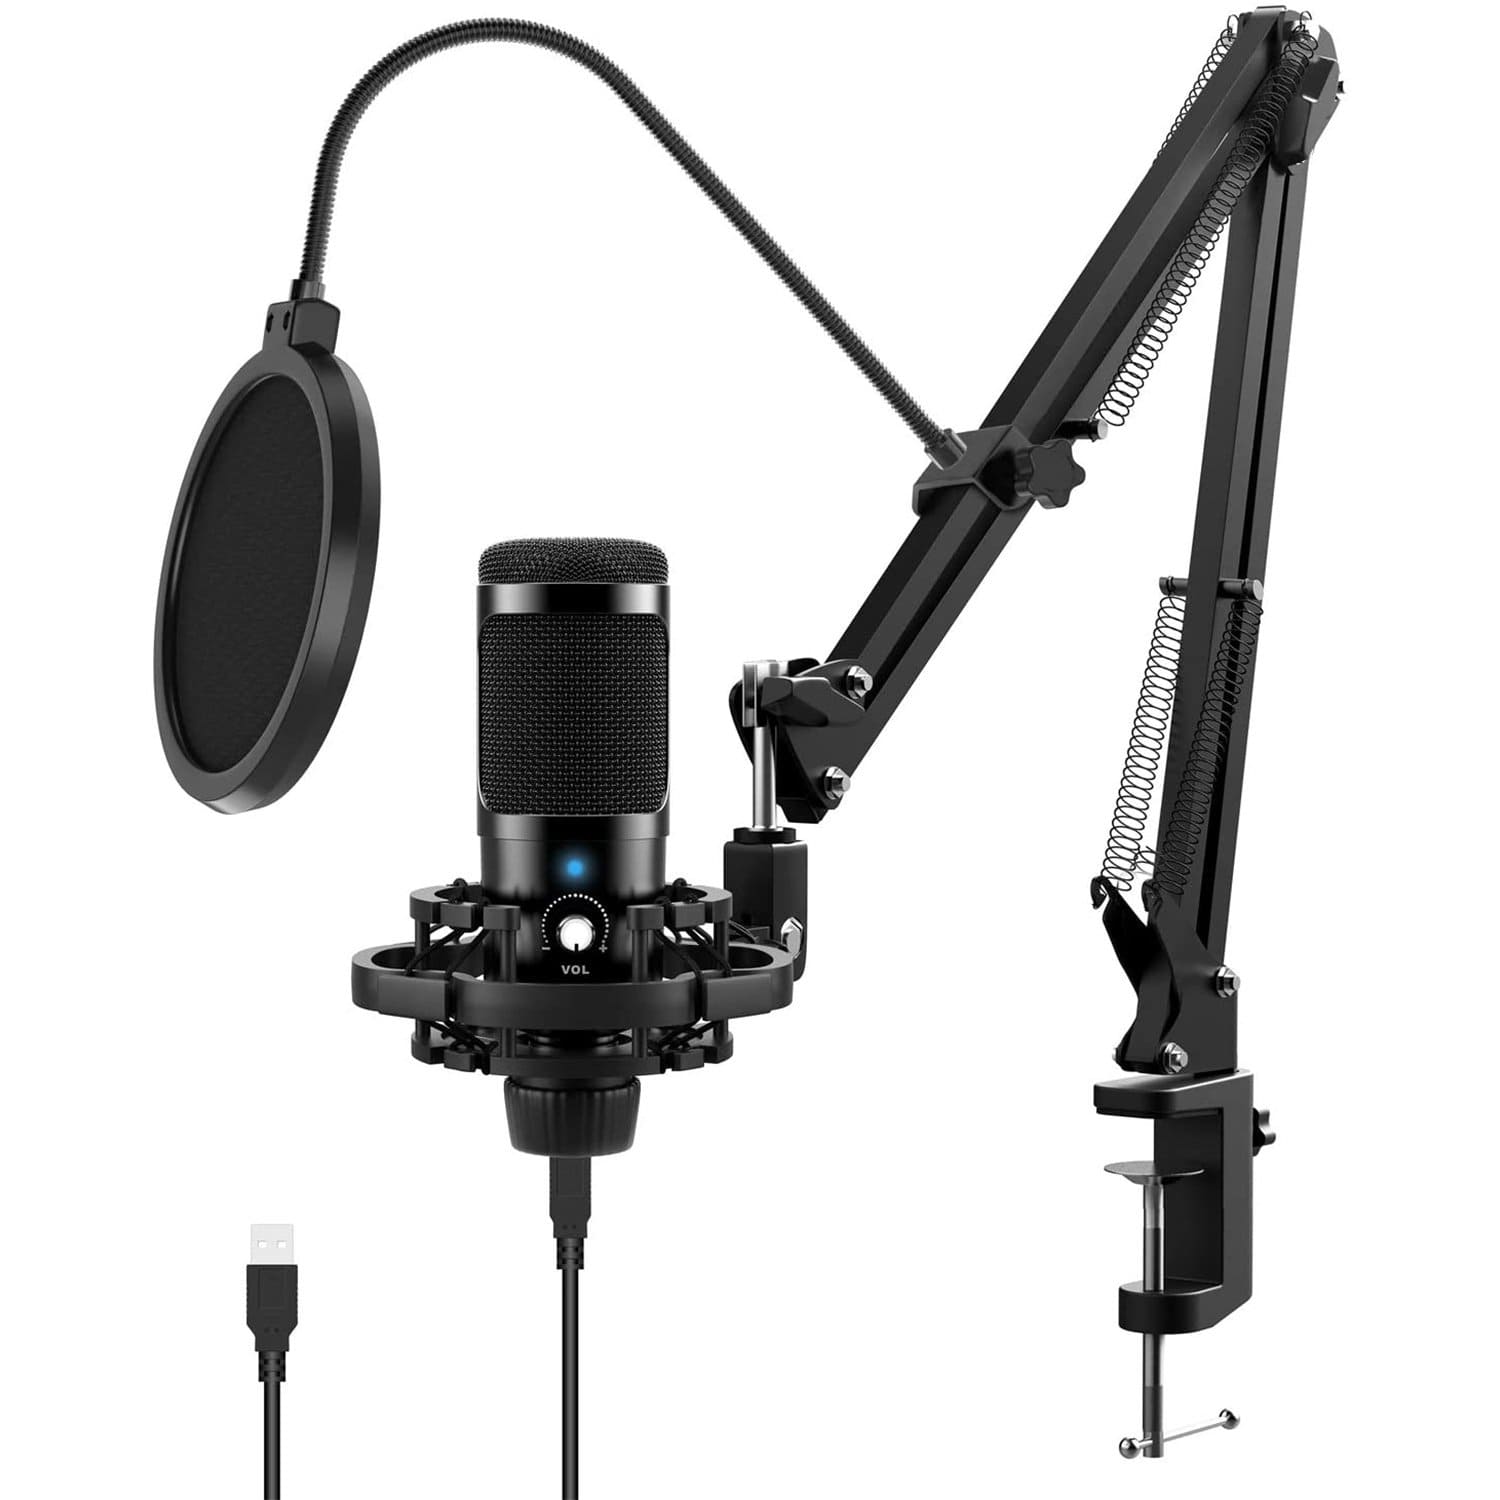 Jeemak PC20 USB Microphone Kit for Computer Microphone Set (USA ONLY)